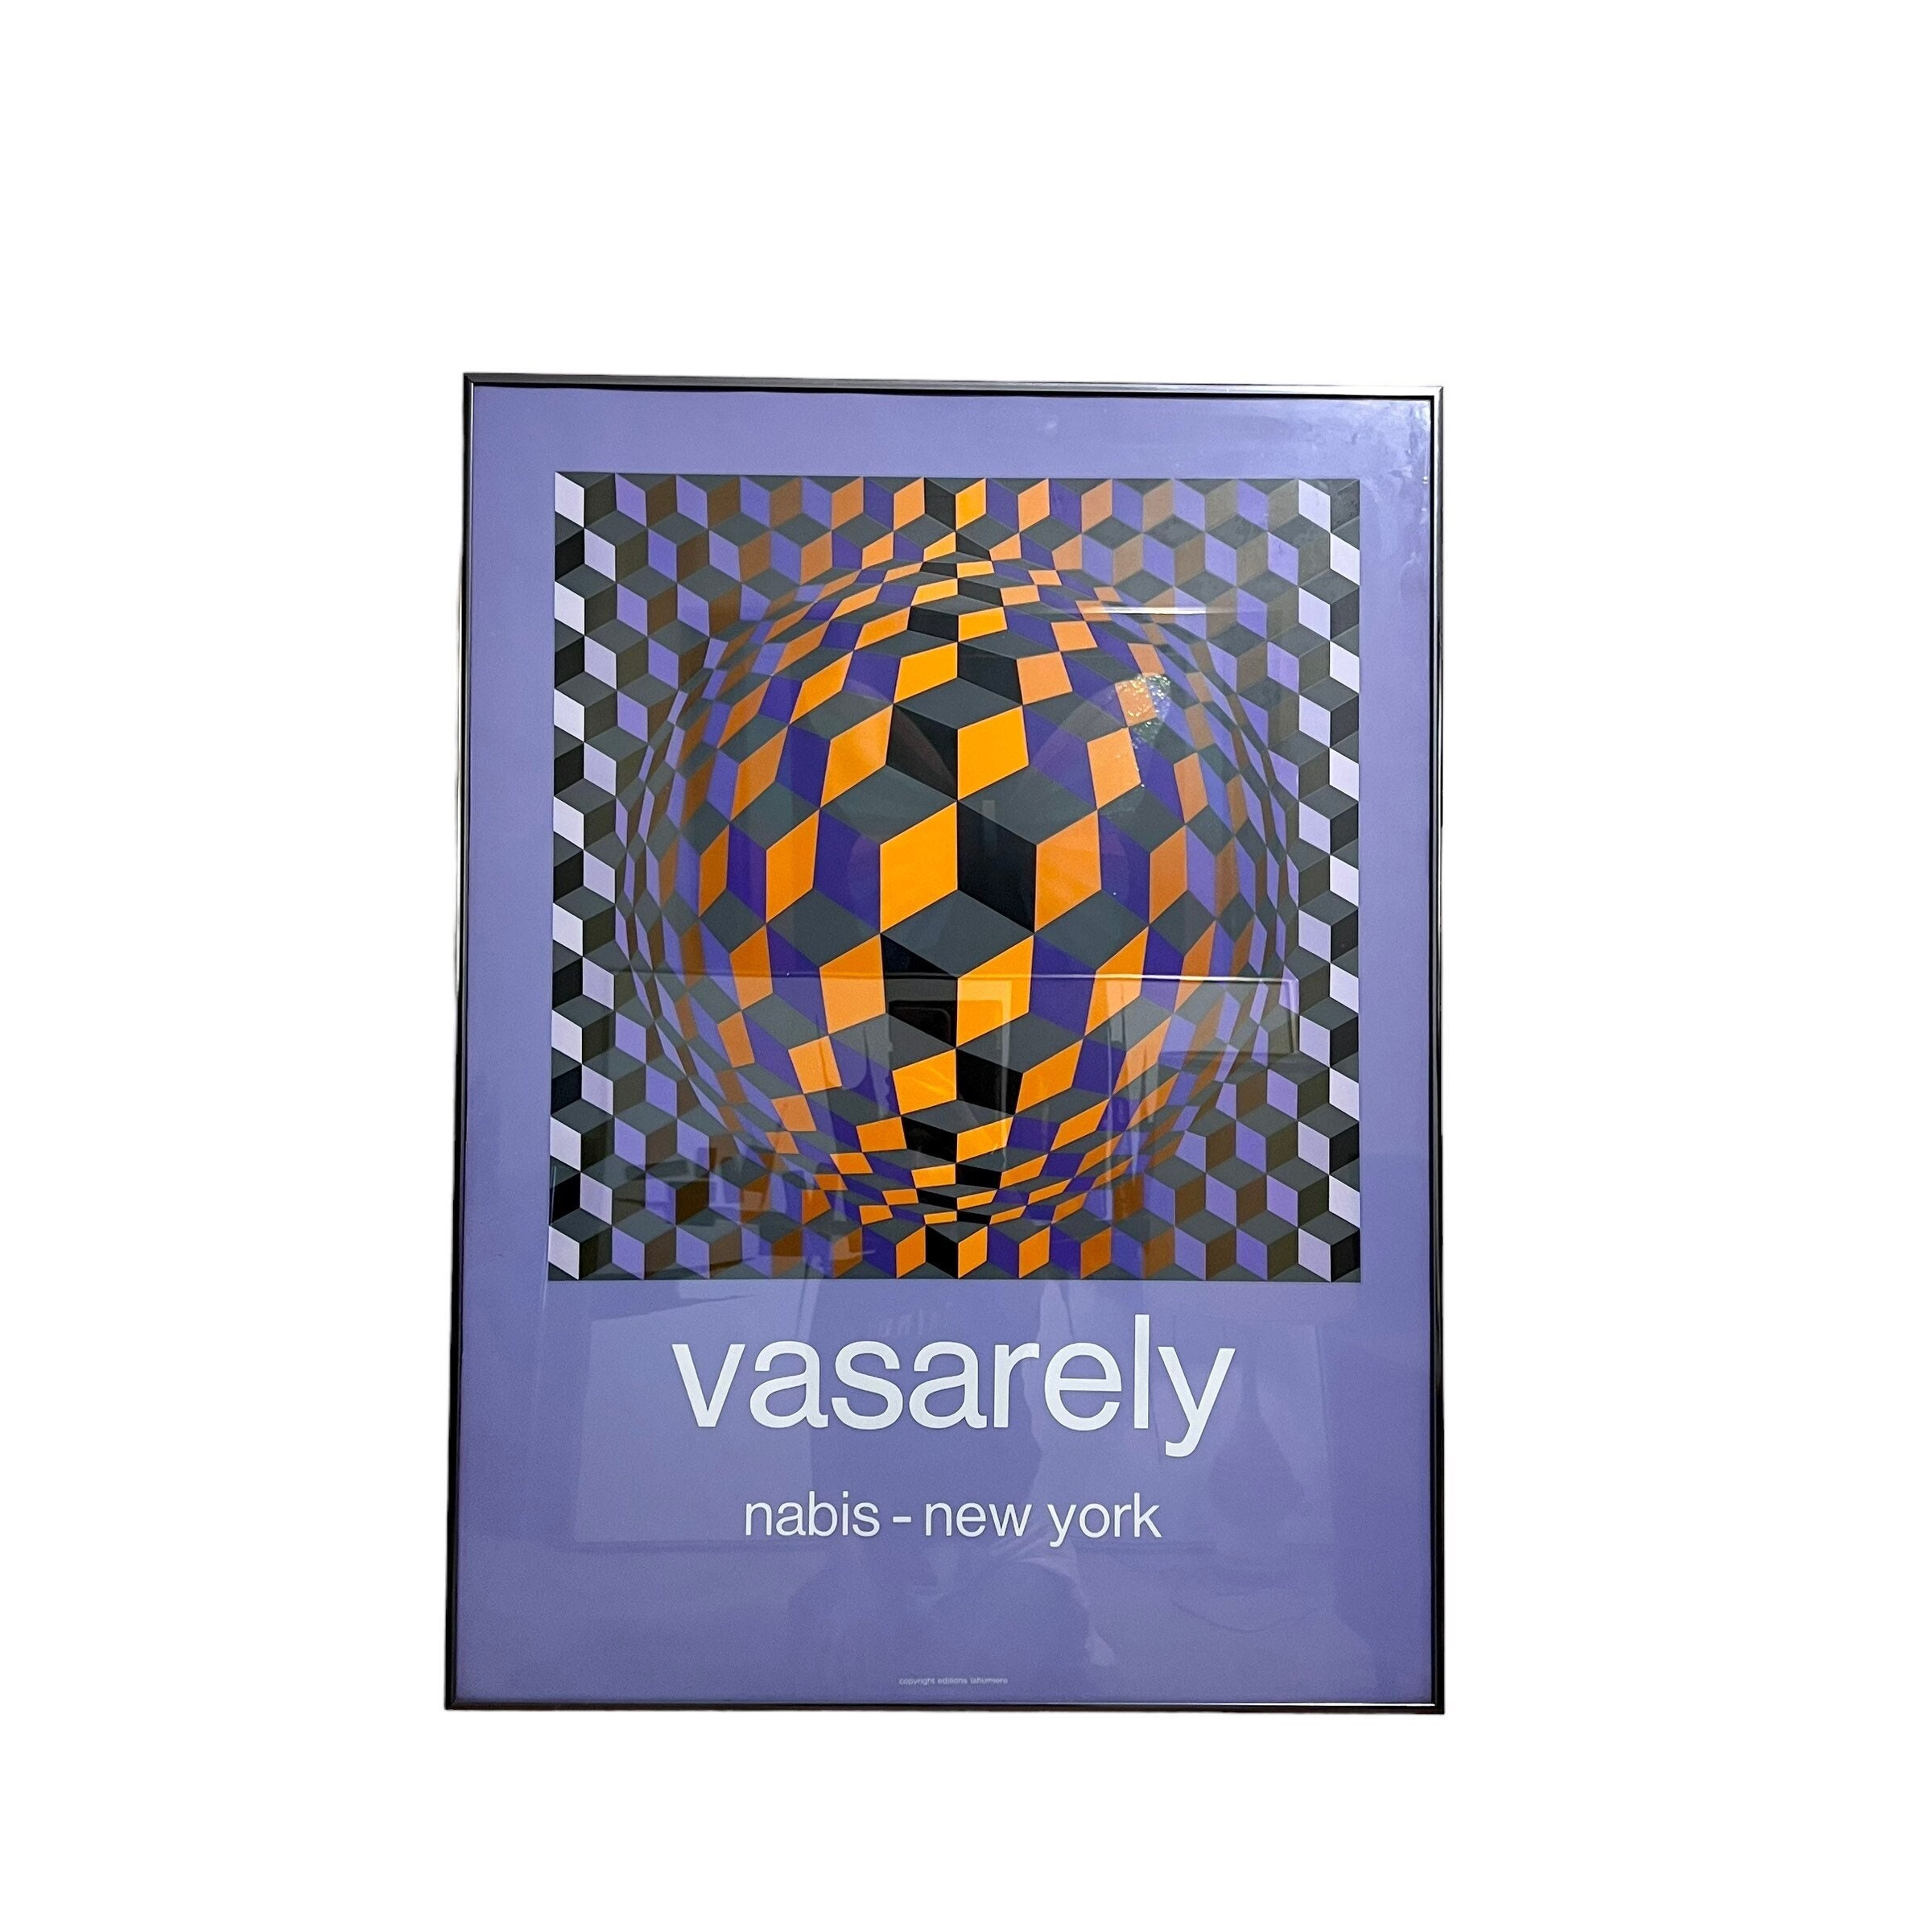 Victor VASARELY - Rare Offset Lithographic Poster, 2019 - Lithographs